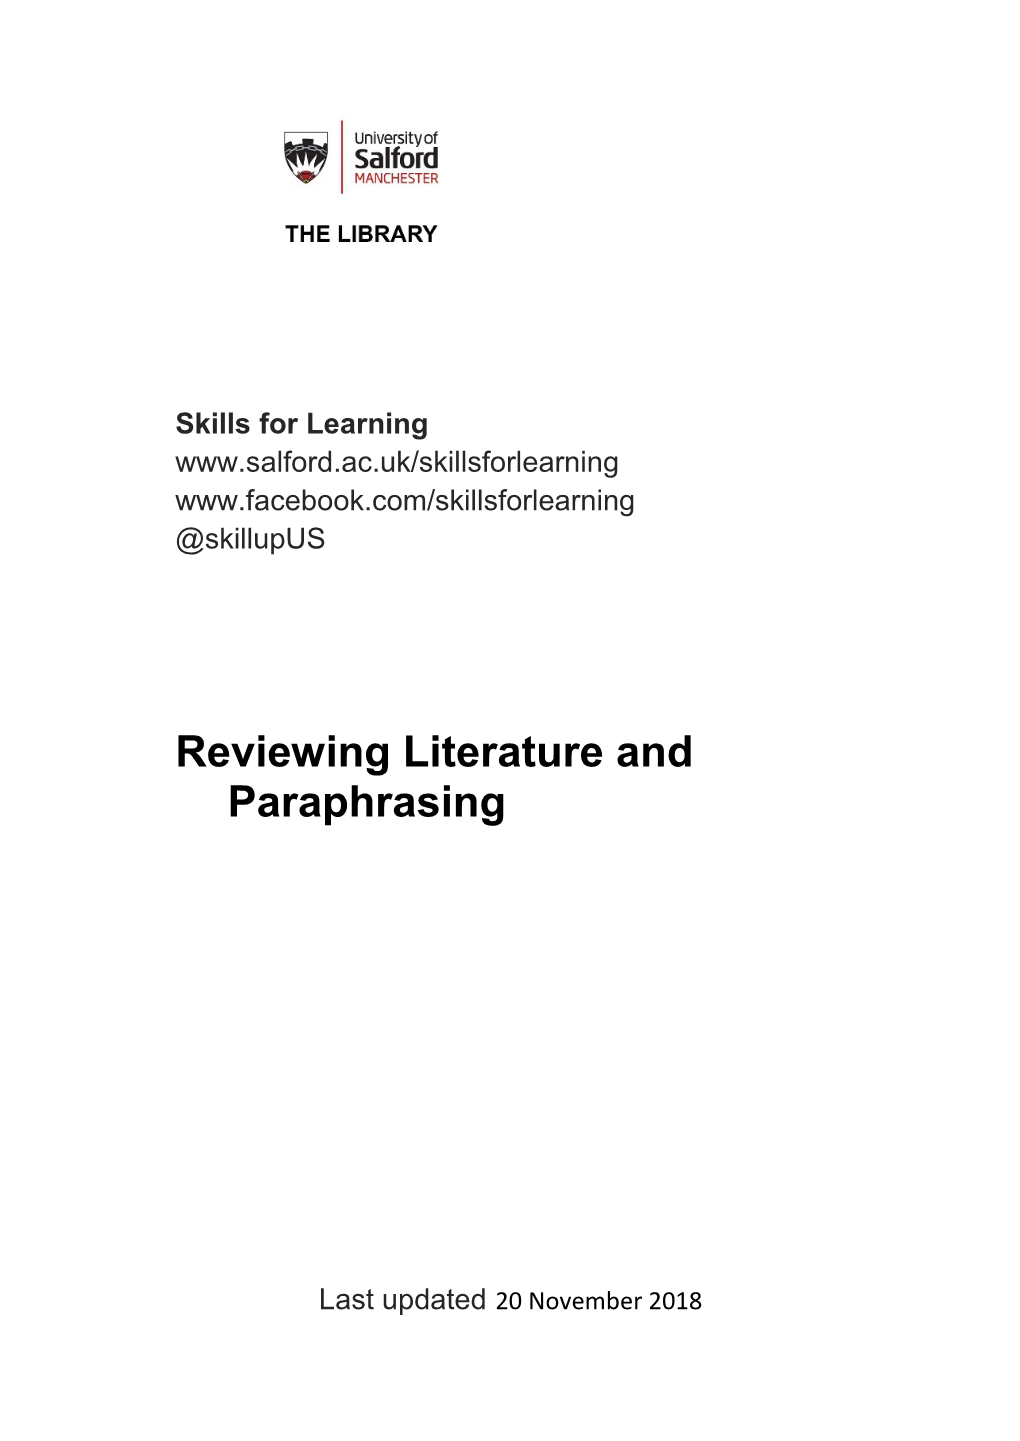 Reviewing Literature and Paraphrasing